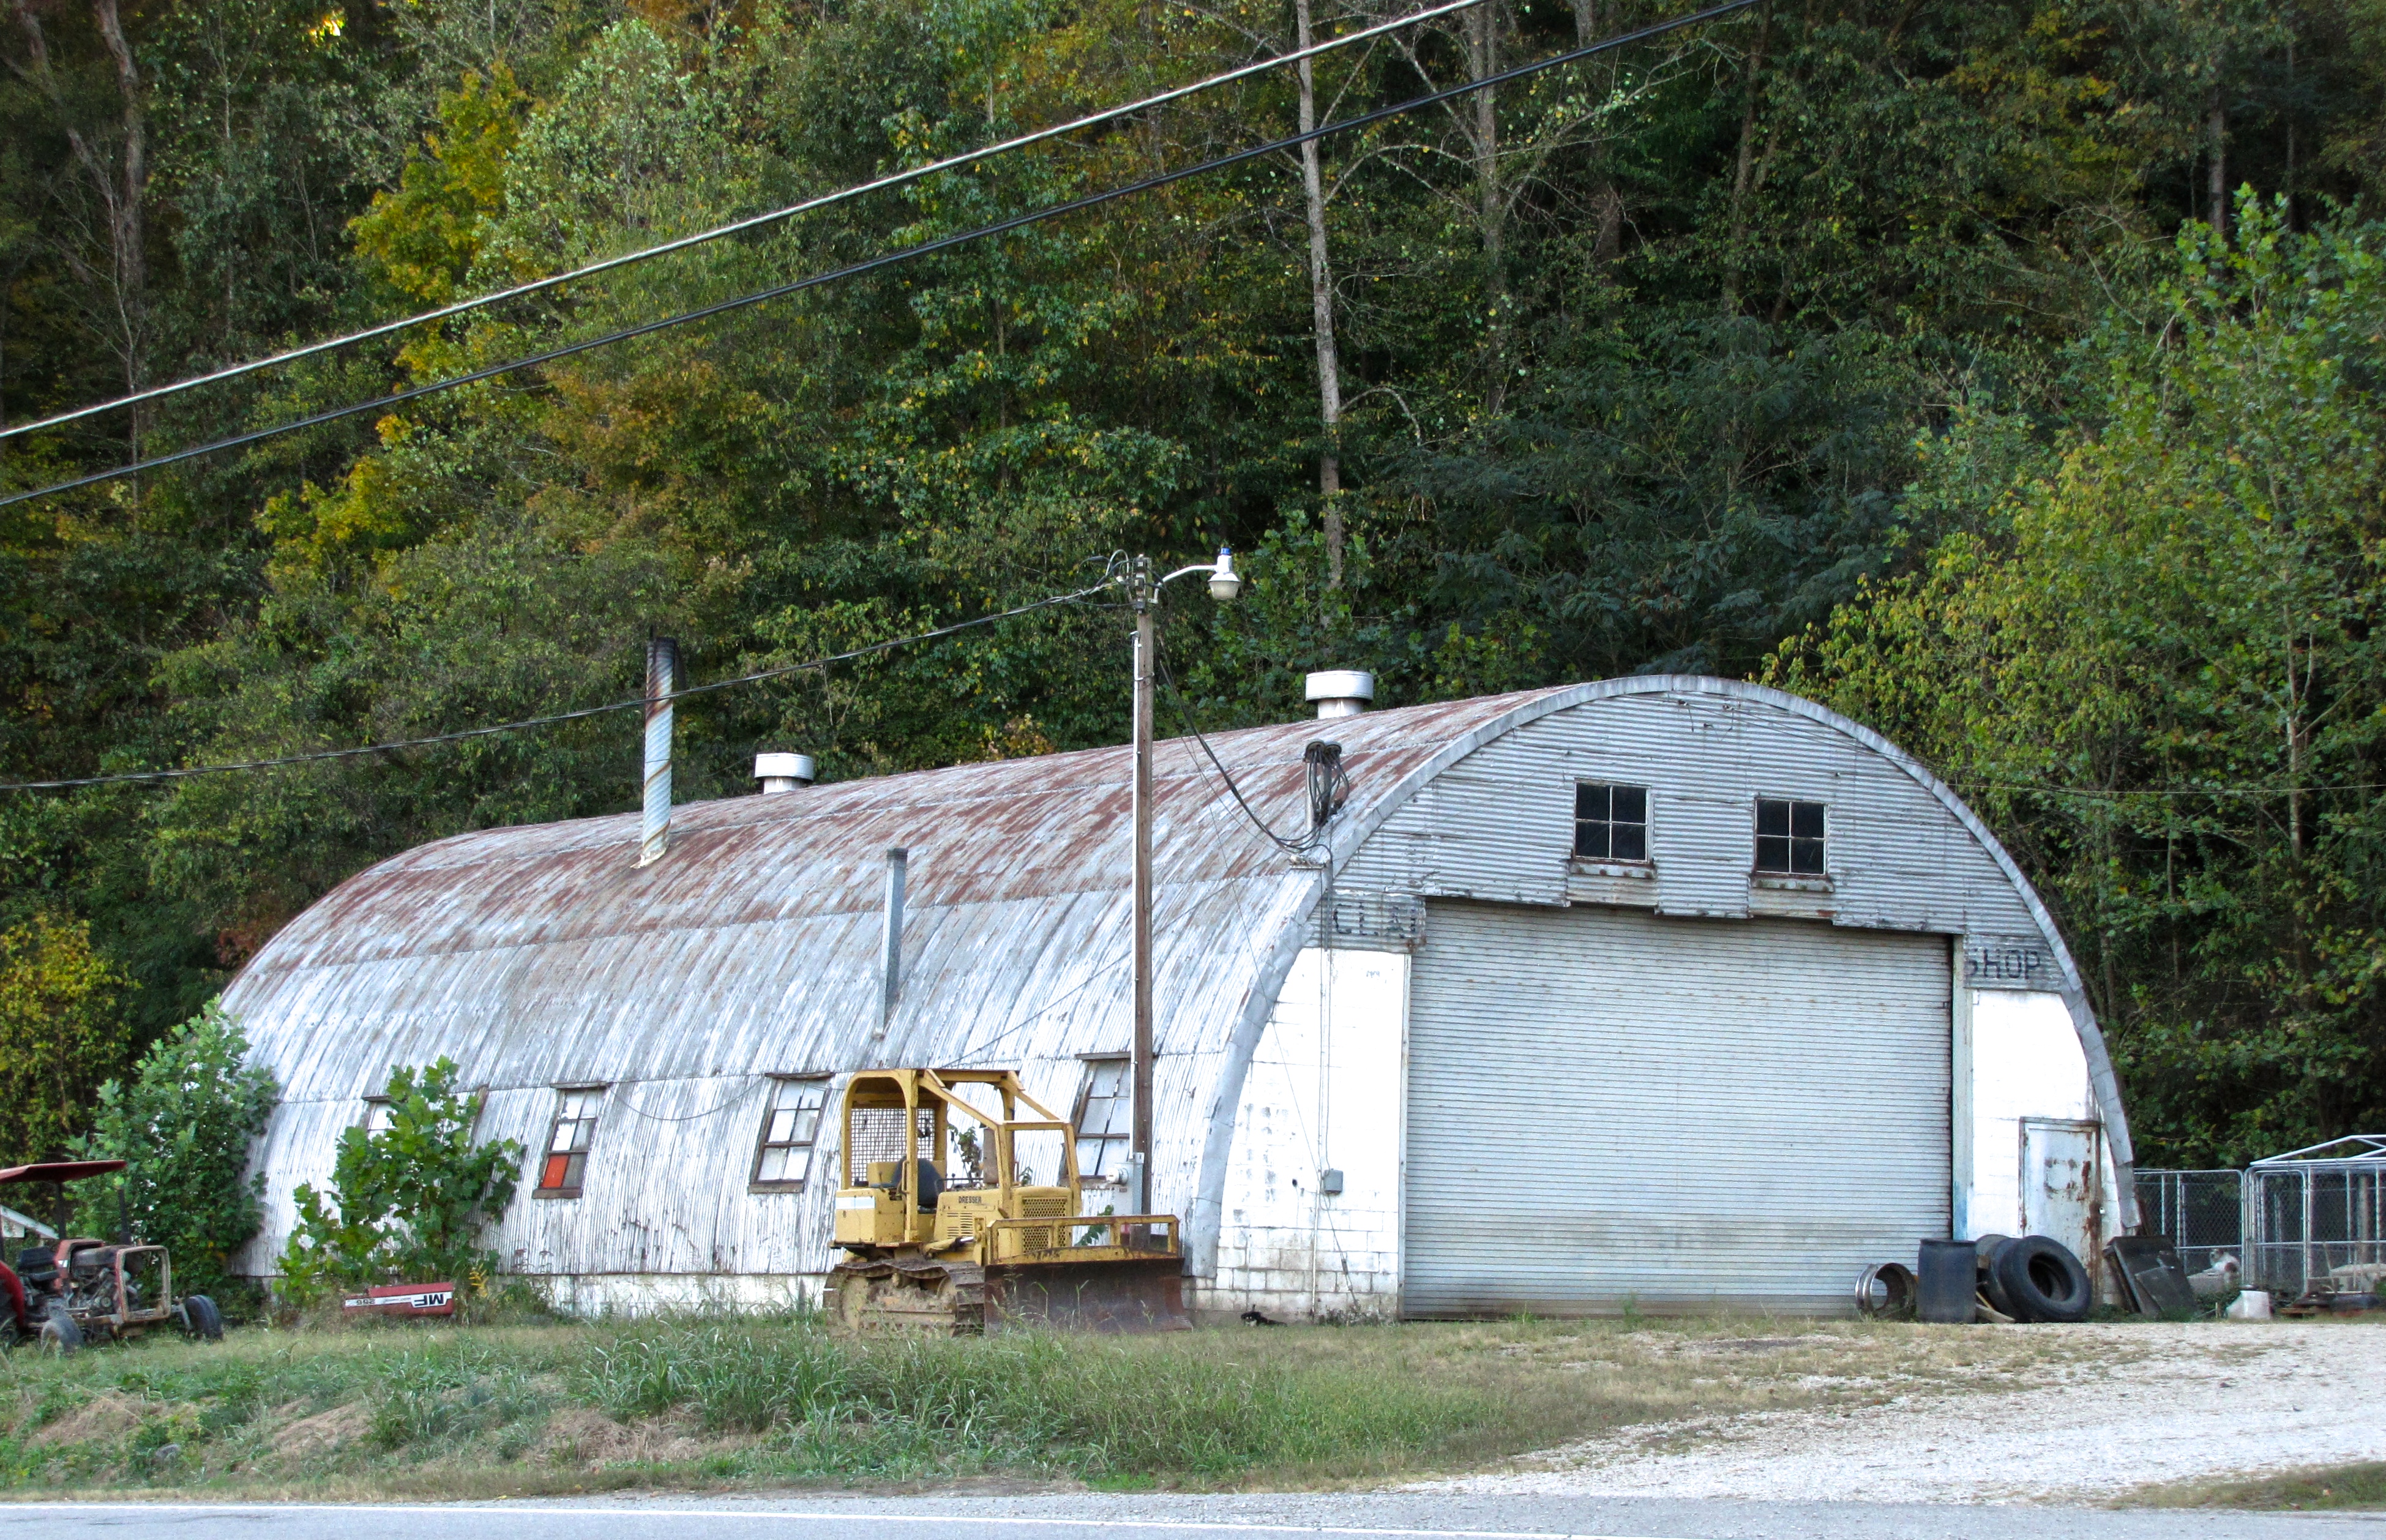 quonset hut in Rogers, AR